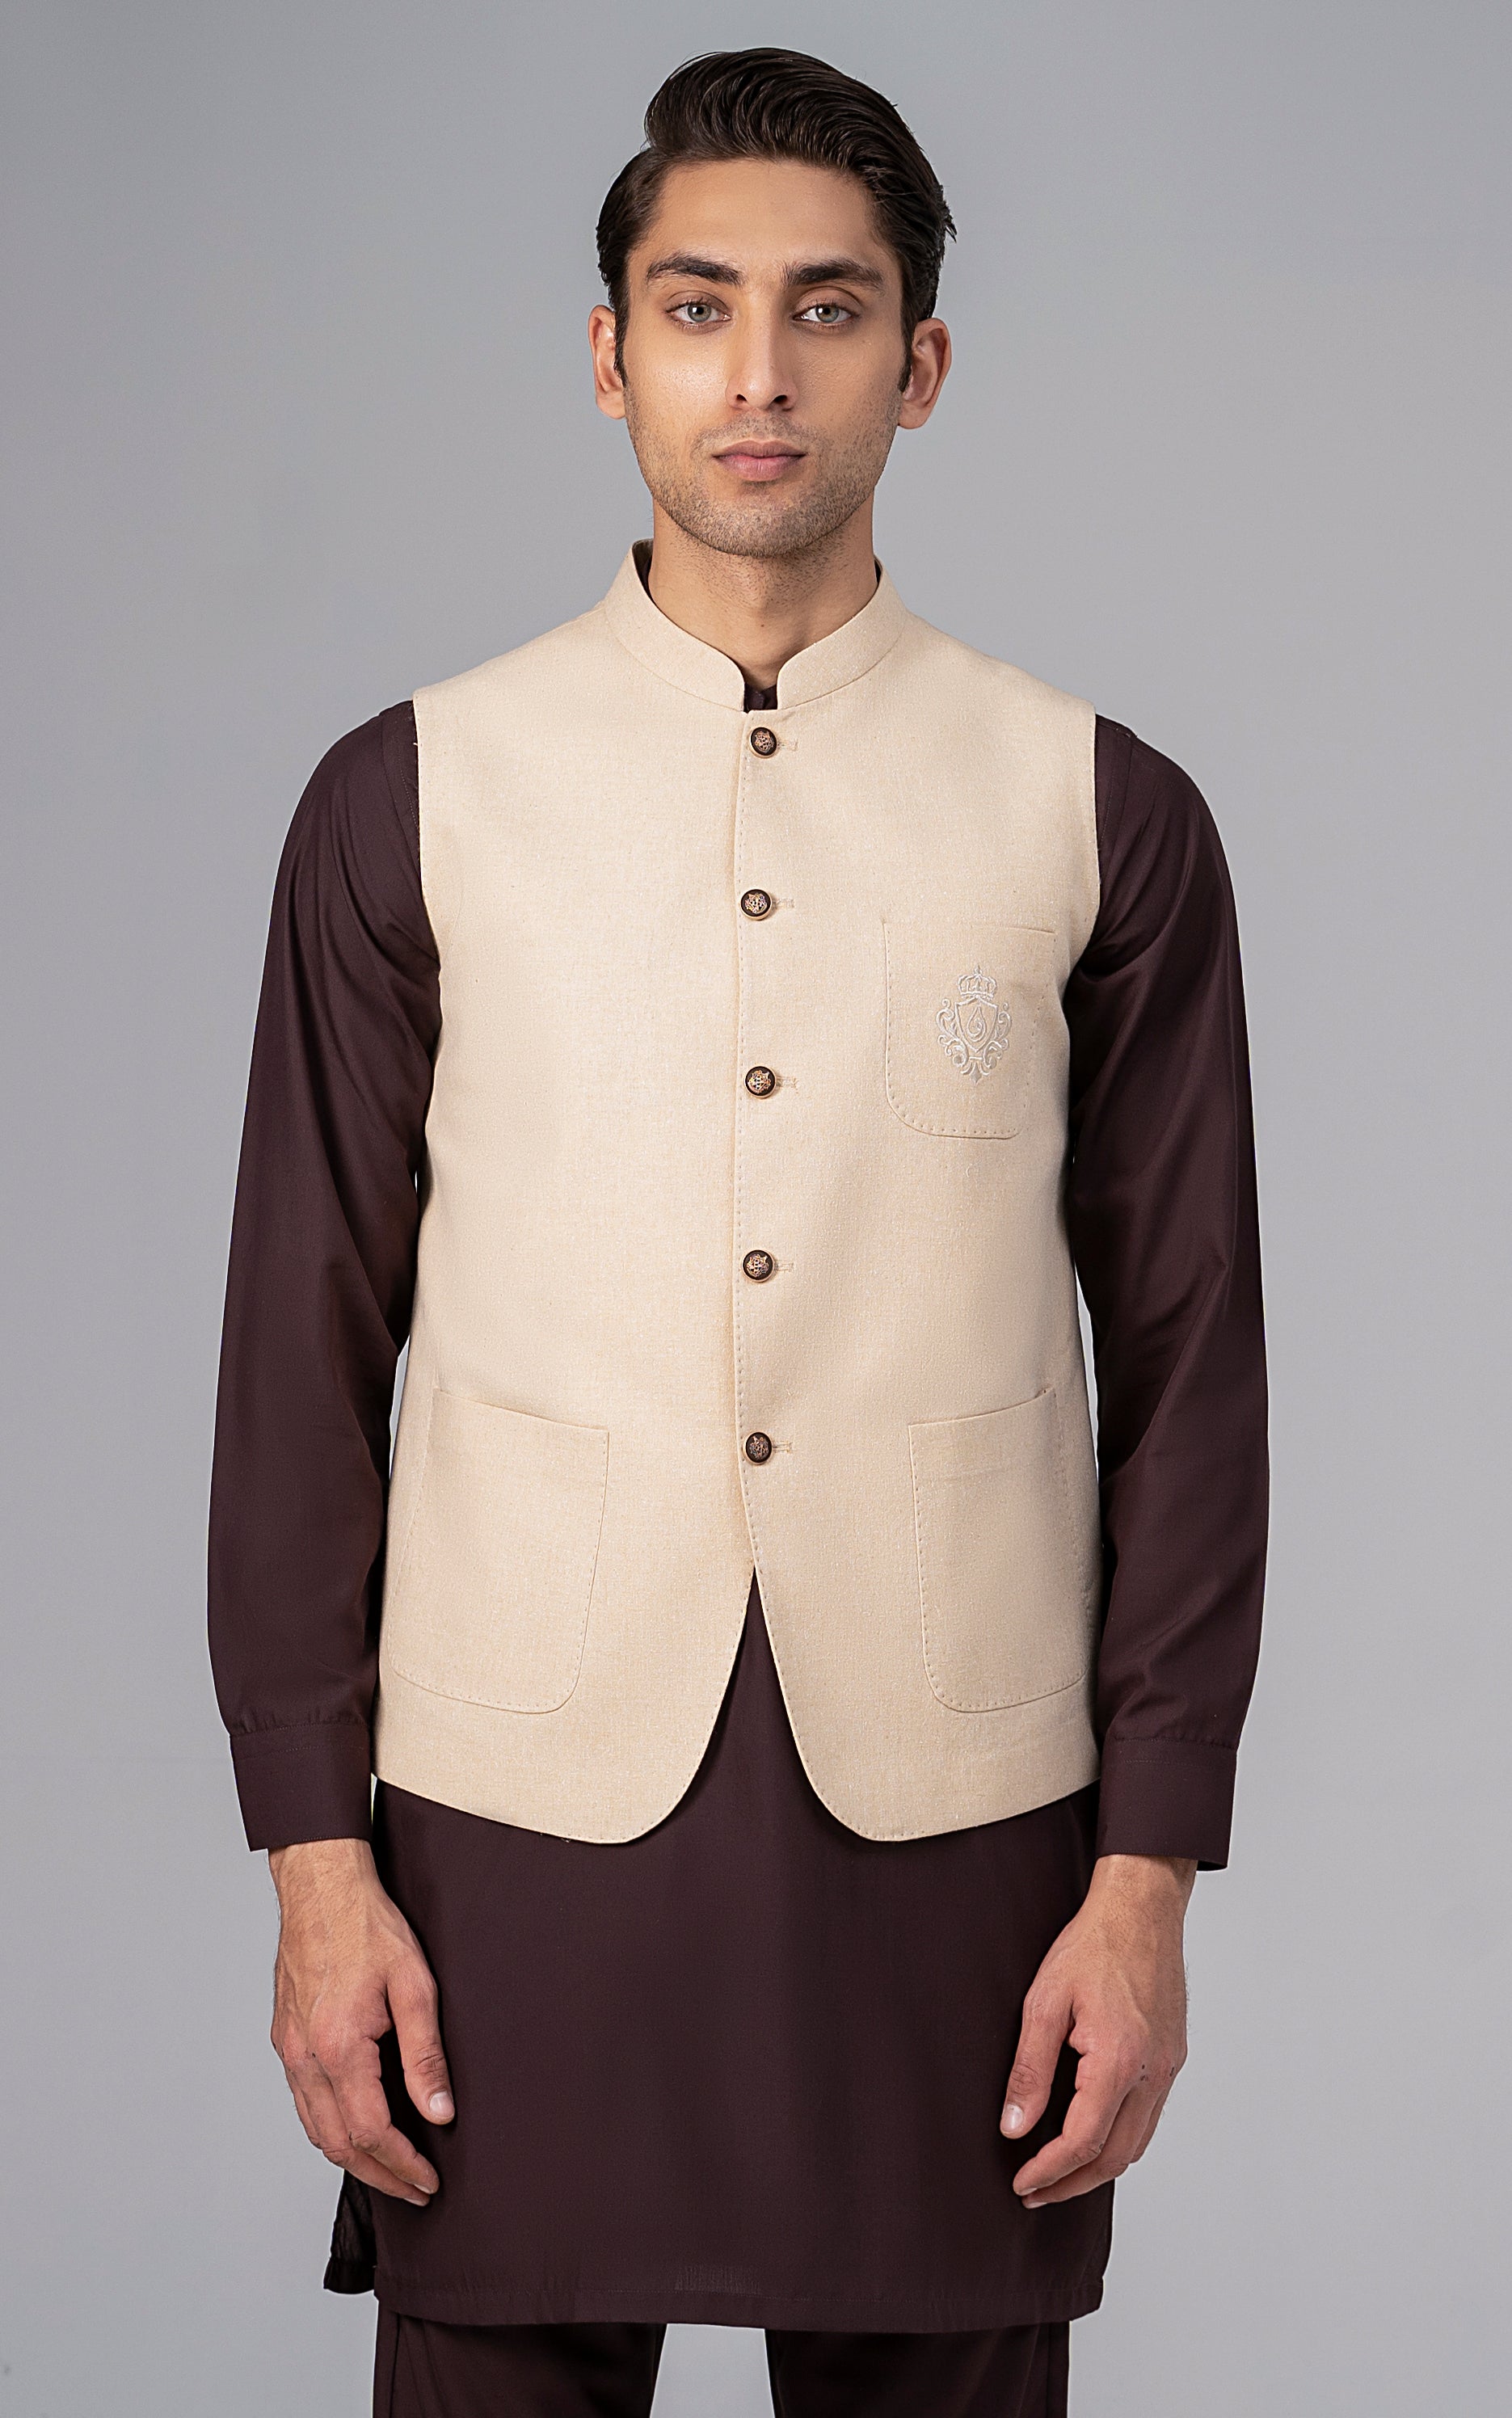 LOGO EMBROIDERED WAISTCOAT- CLASSIC COLLECTION BEIGE